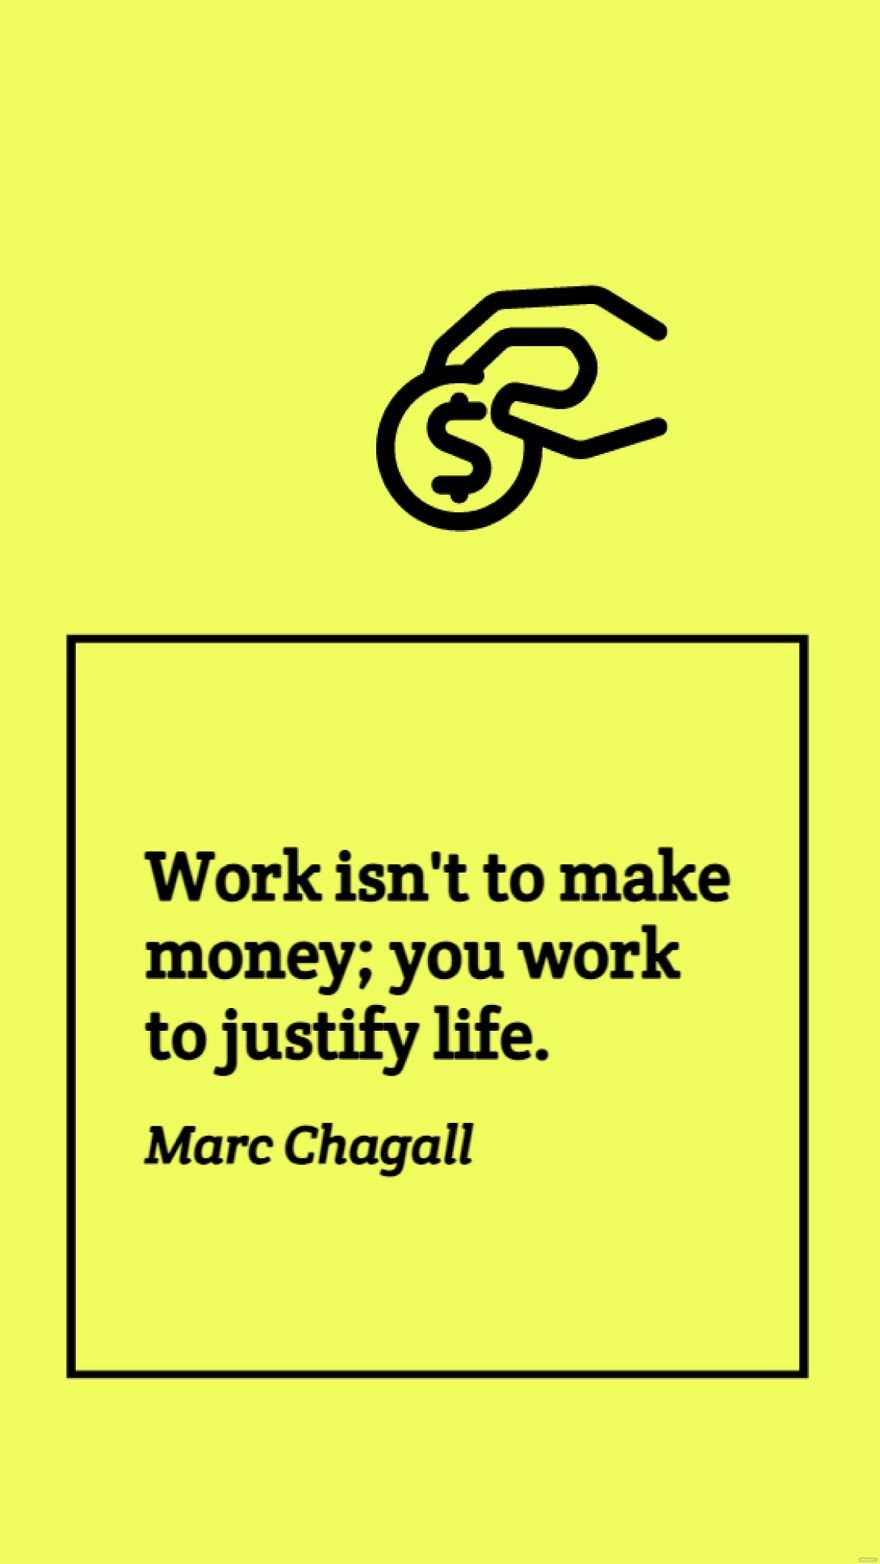 Free Marc Chagall - Work isn't to make money; you work to justify life. in JPG